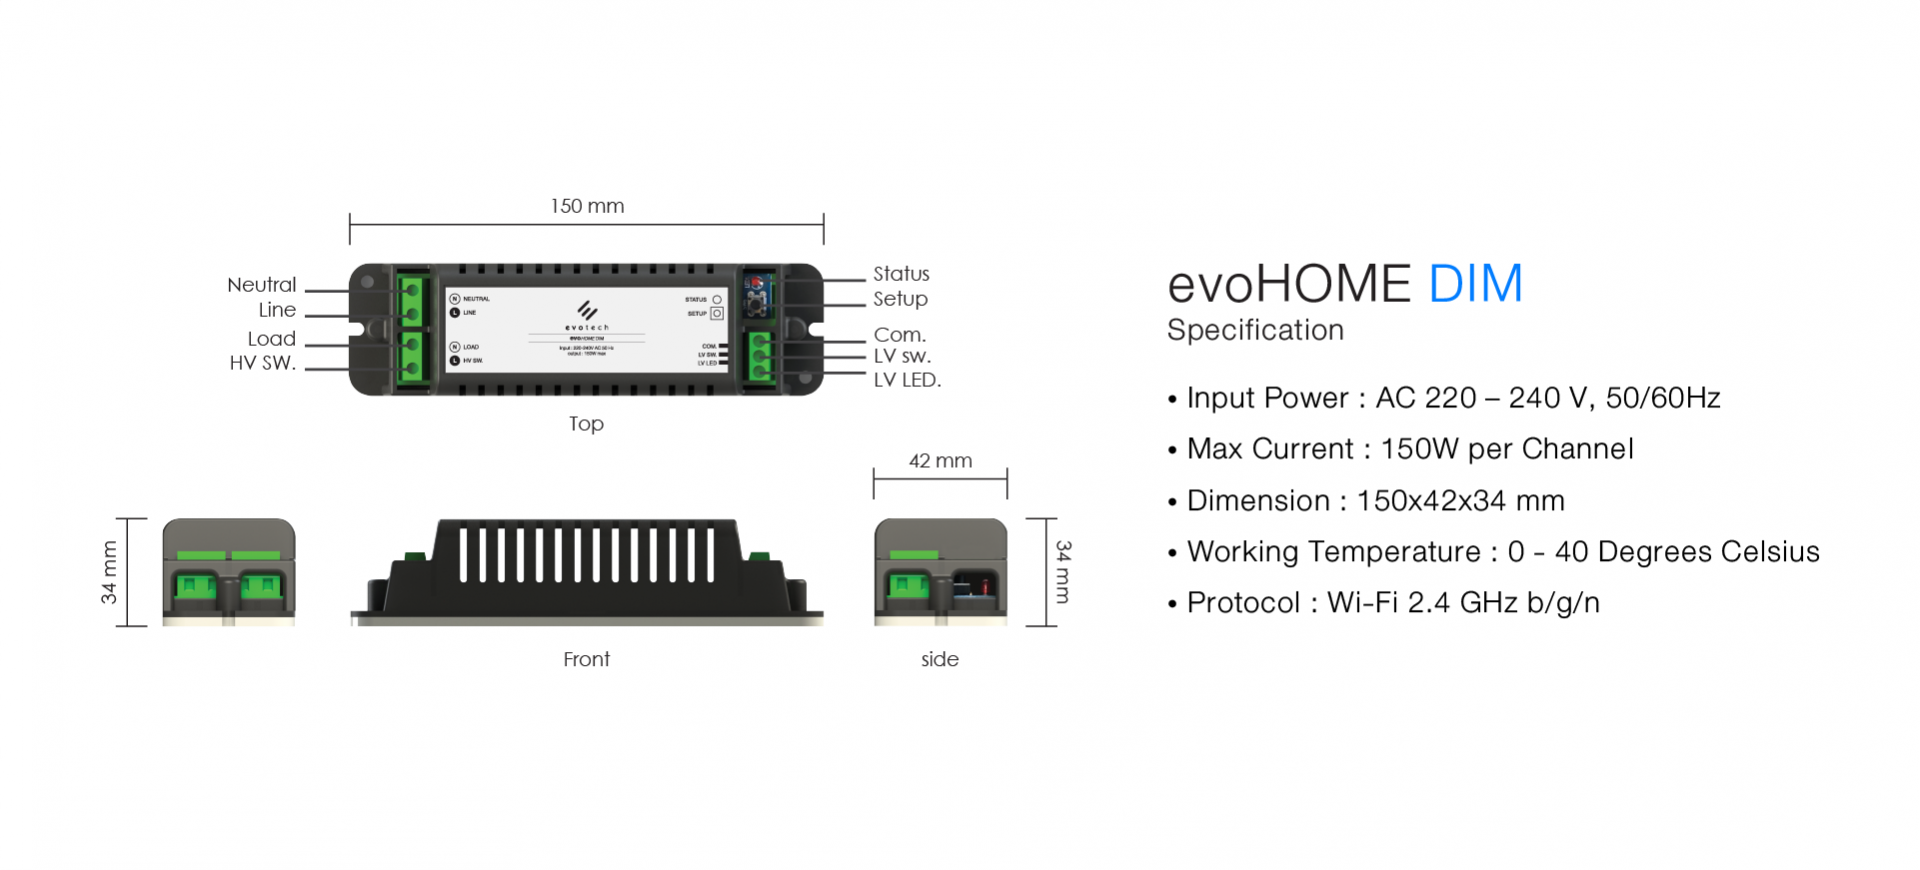 evoHOME Dimmer - Specification